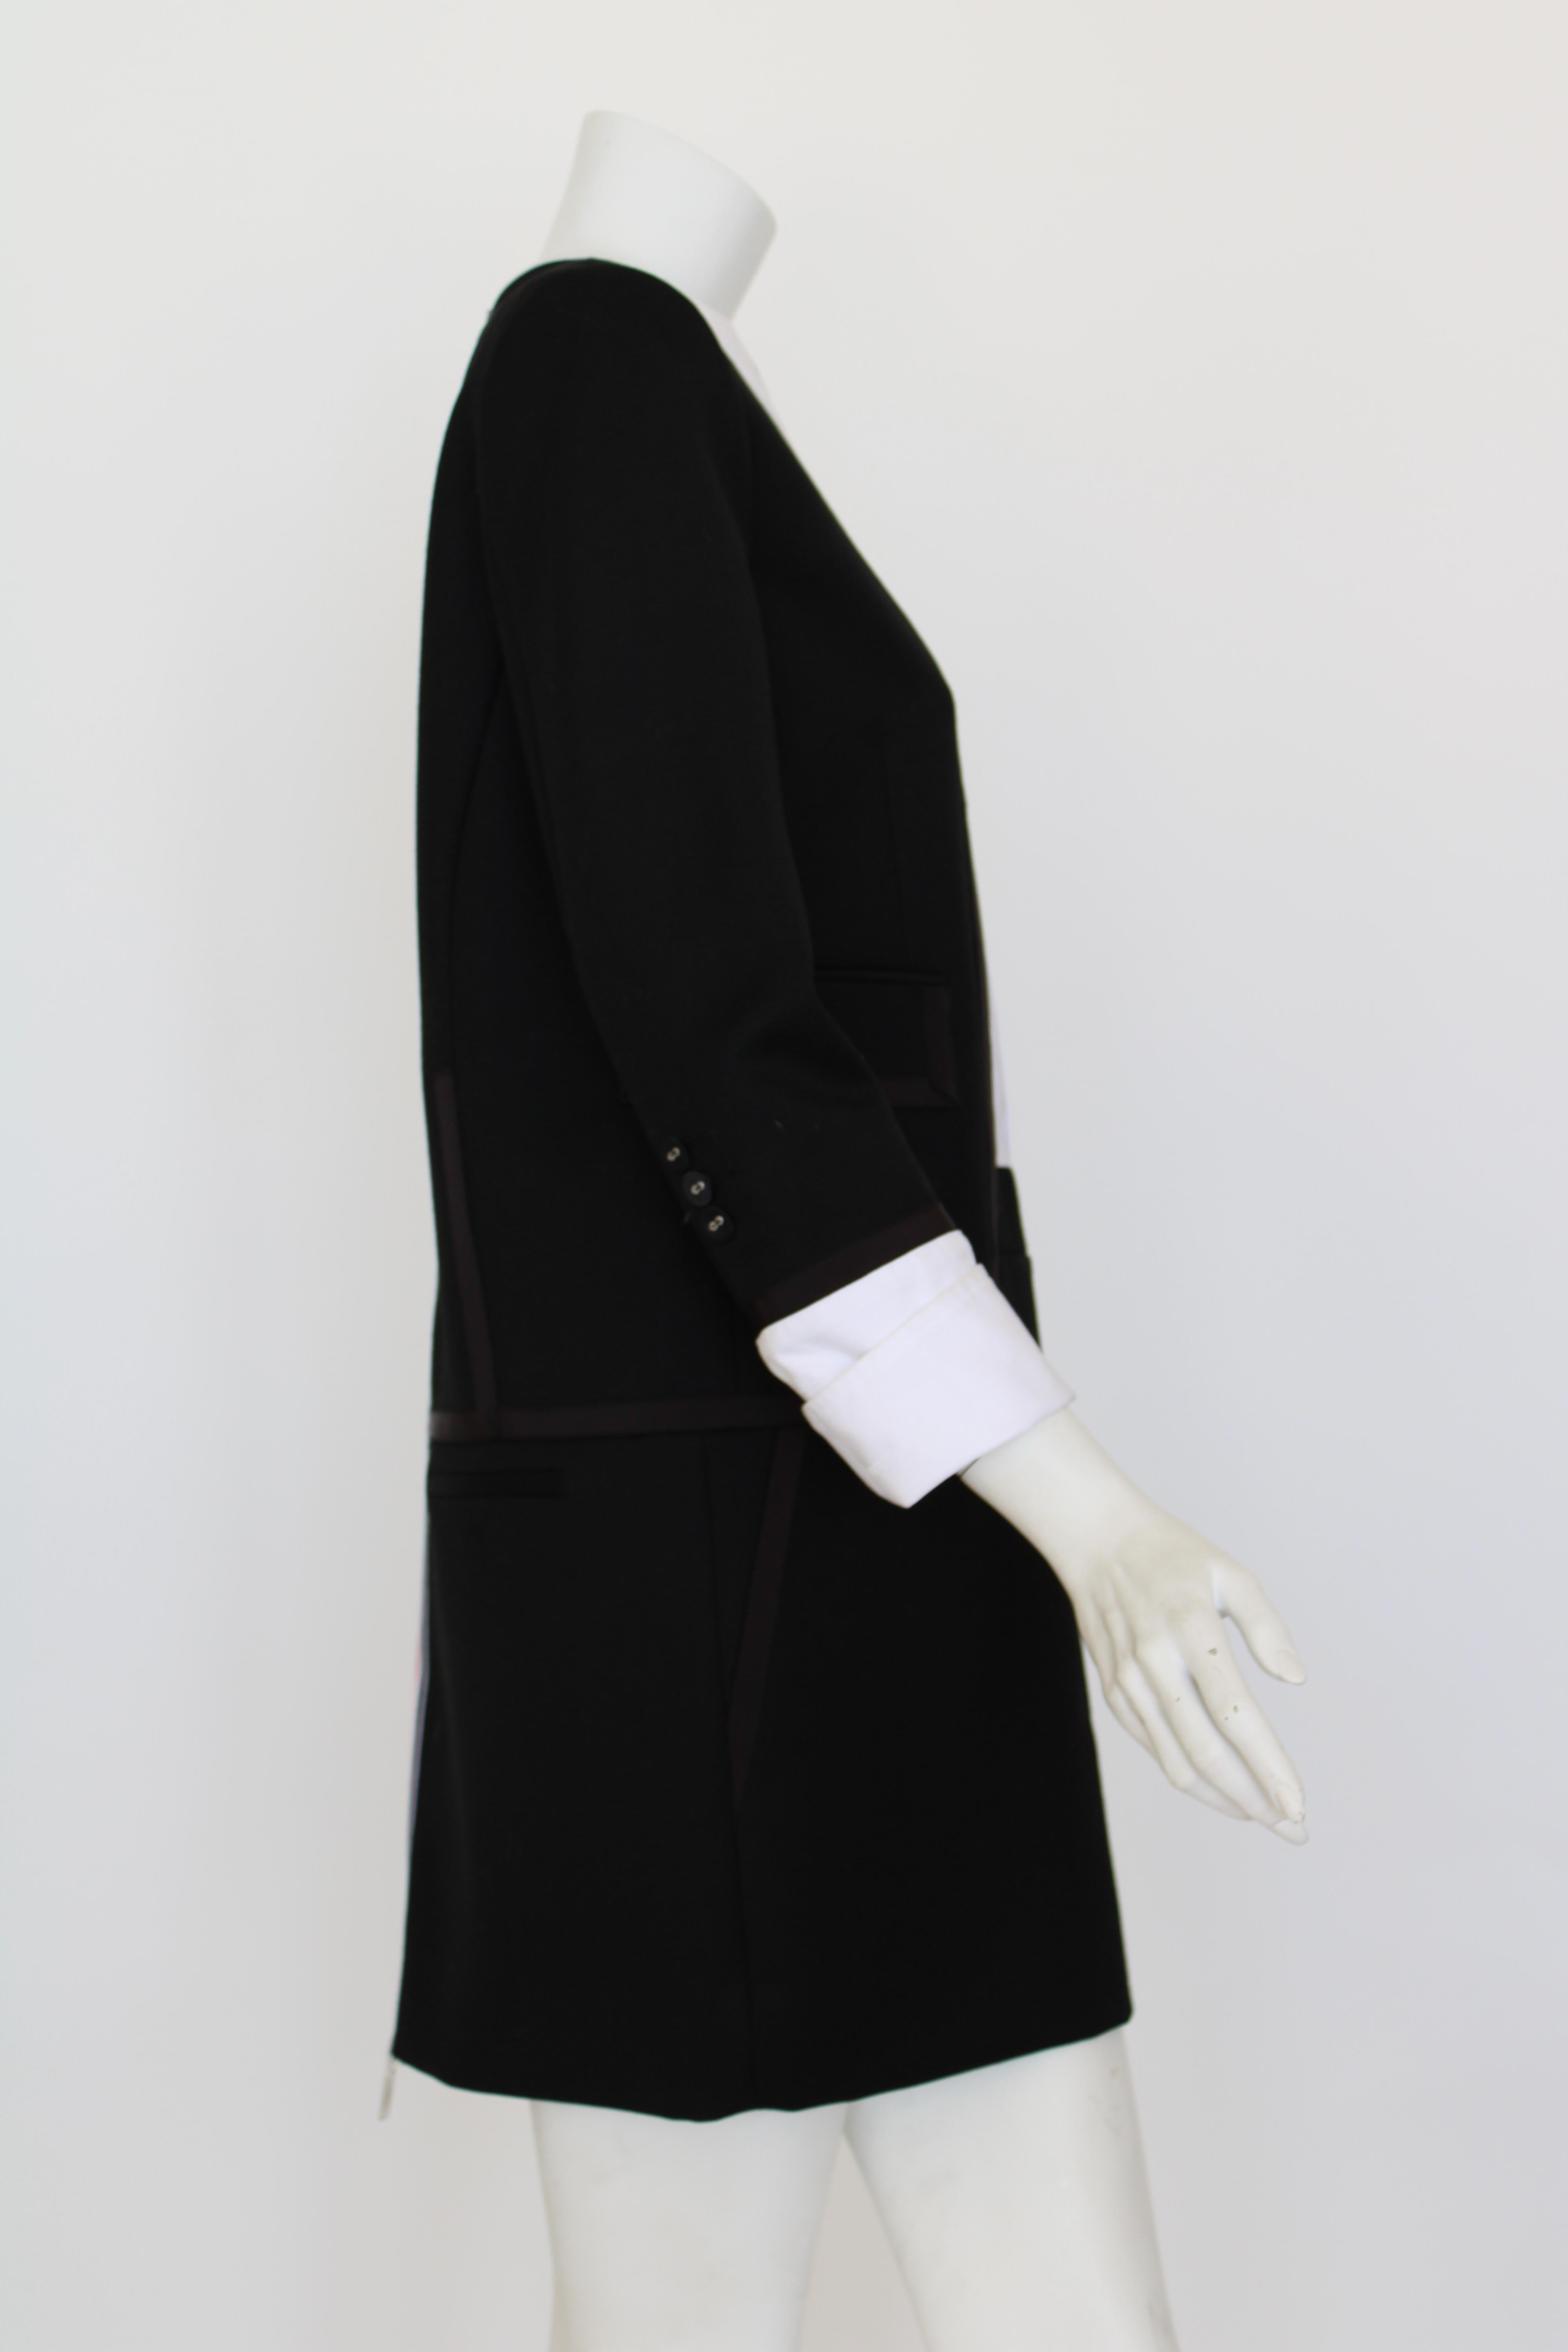 Thom Browne tuxedo trompe l'oeil dress In New Condition For Sale In New York, NY